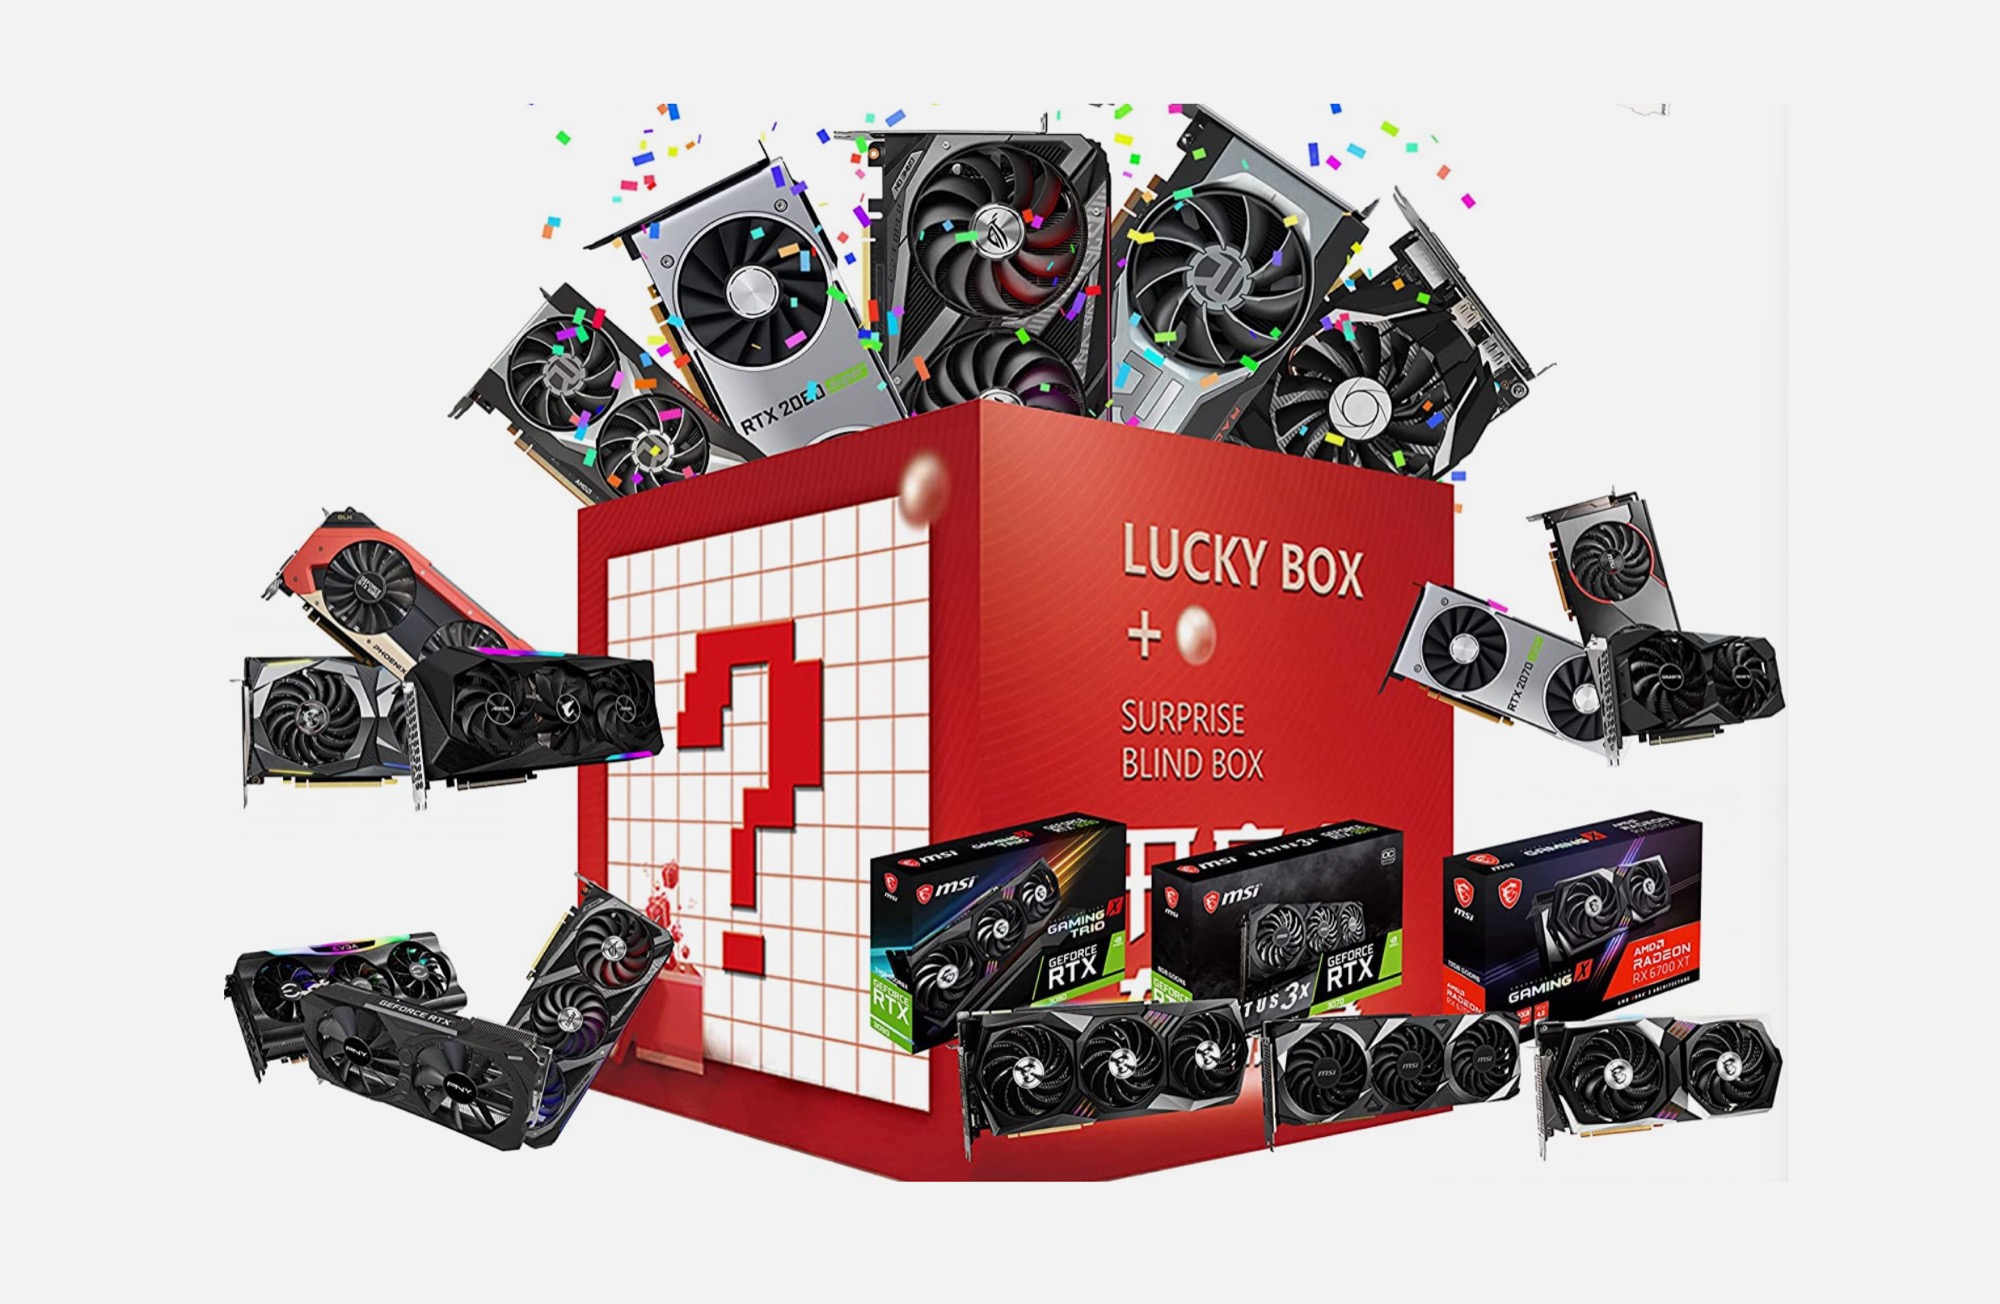 Amazon Japan brings loot boxes to desktop GPUs with a 2% chance of winning an RTX 3000 or Radeon RX 6000 graphics card for ~US$122 thumbnail